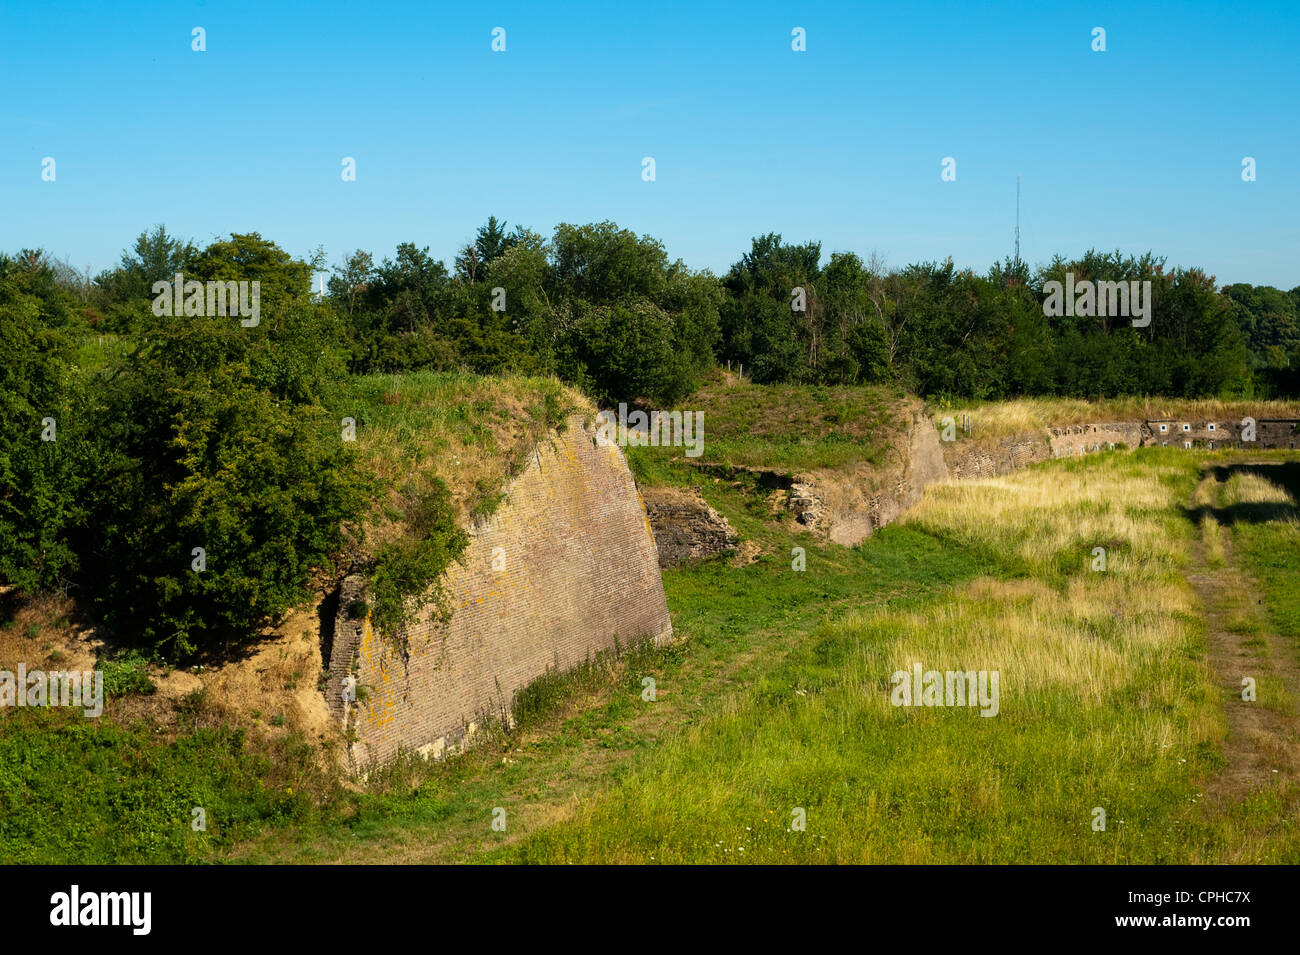 'Hoge Fronten' fortifications, also called 'Linie van Du Moulin', year 1775, Maastricht, Limburg, The Netherlands, Europe. Stock Photo